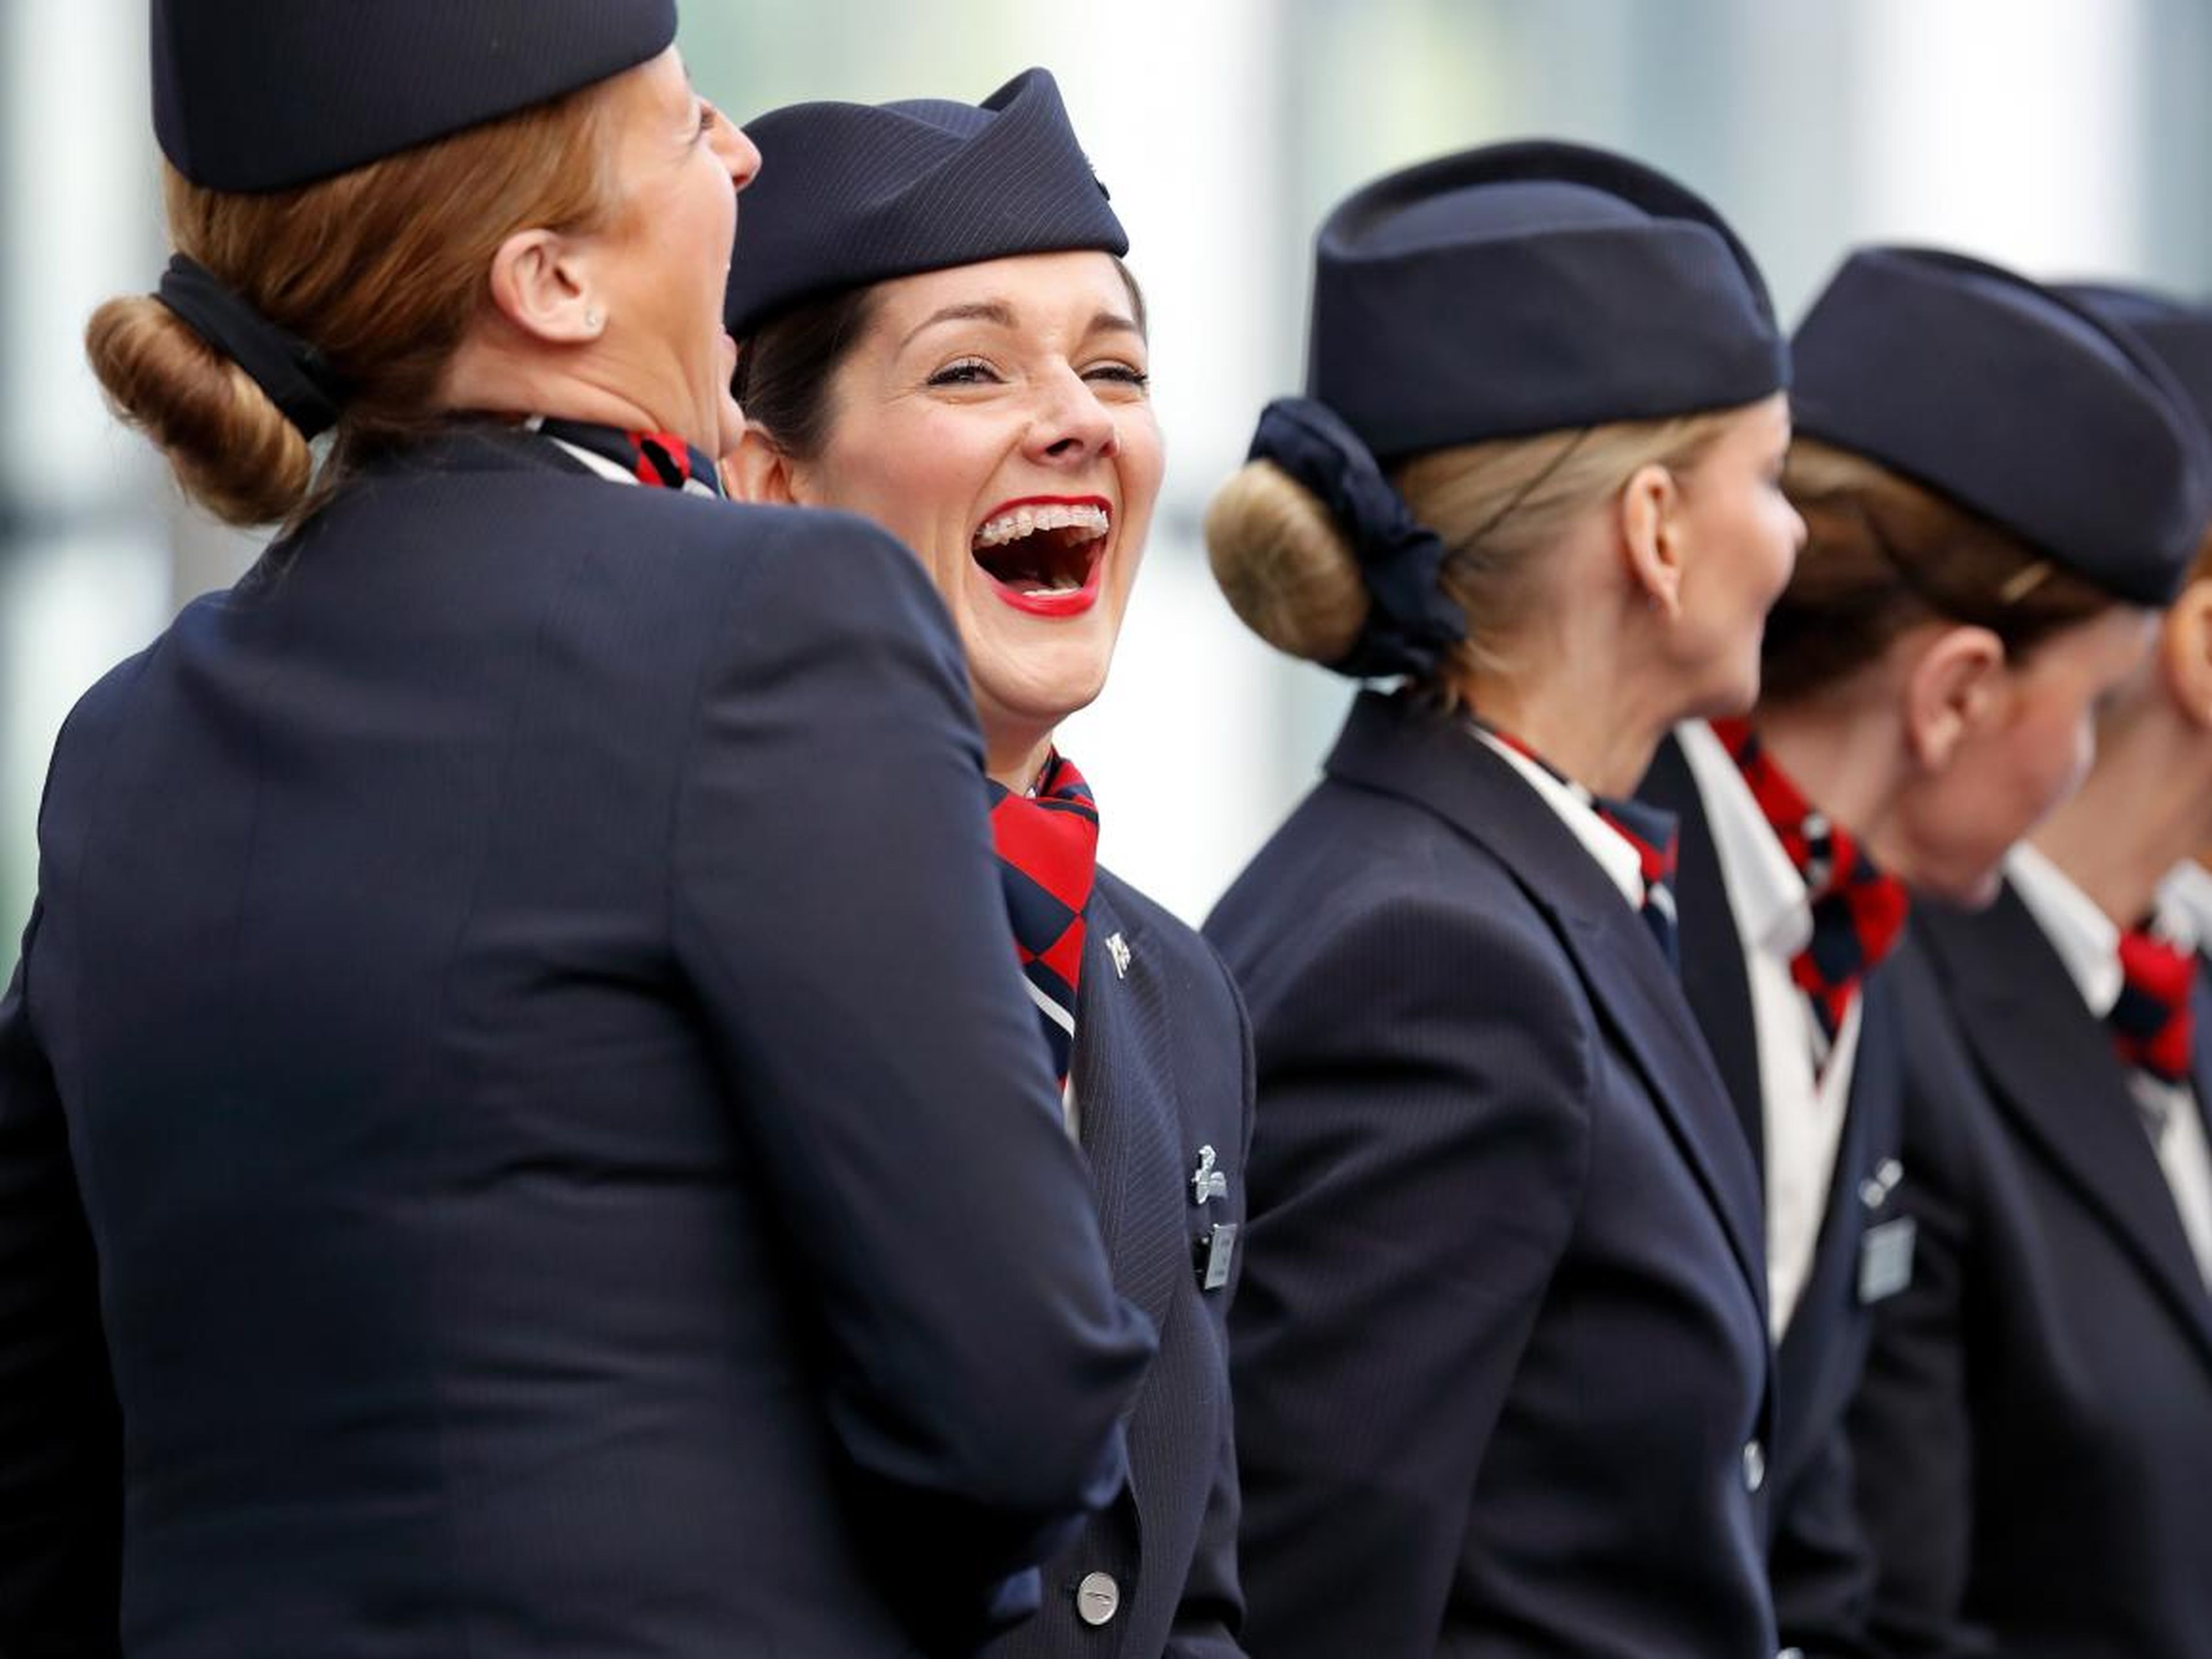 How easy it is to bond with other flight attendants